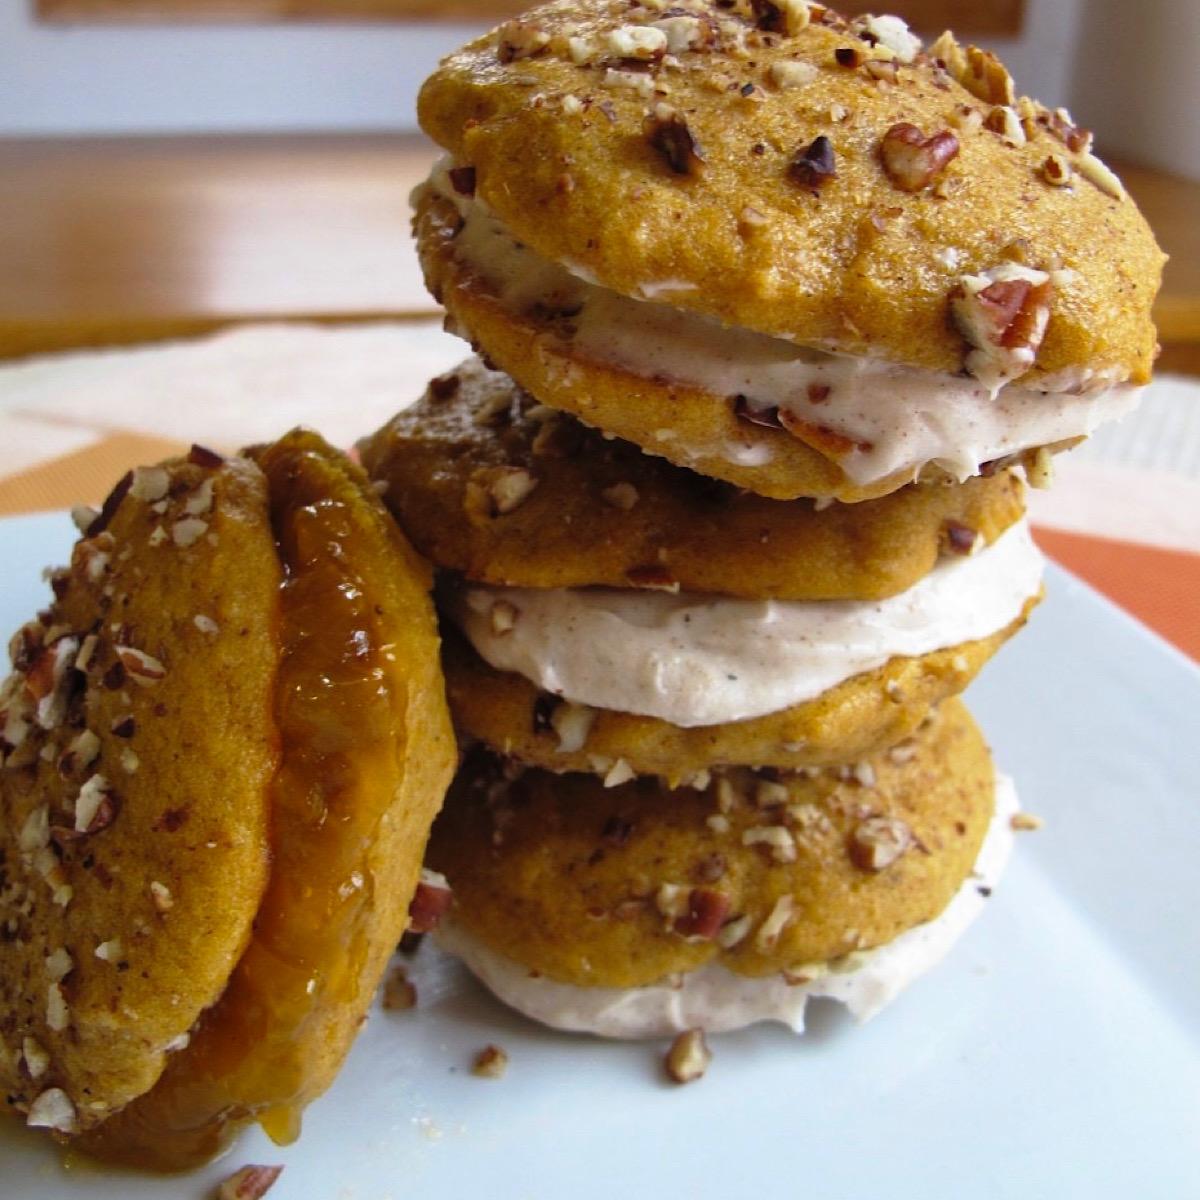 Four pumpkin whoopie pies with chai spice filling